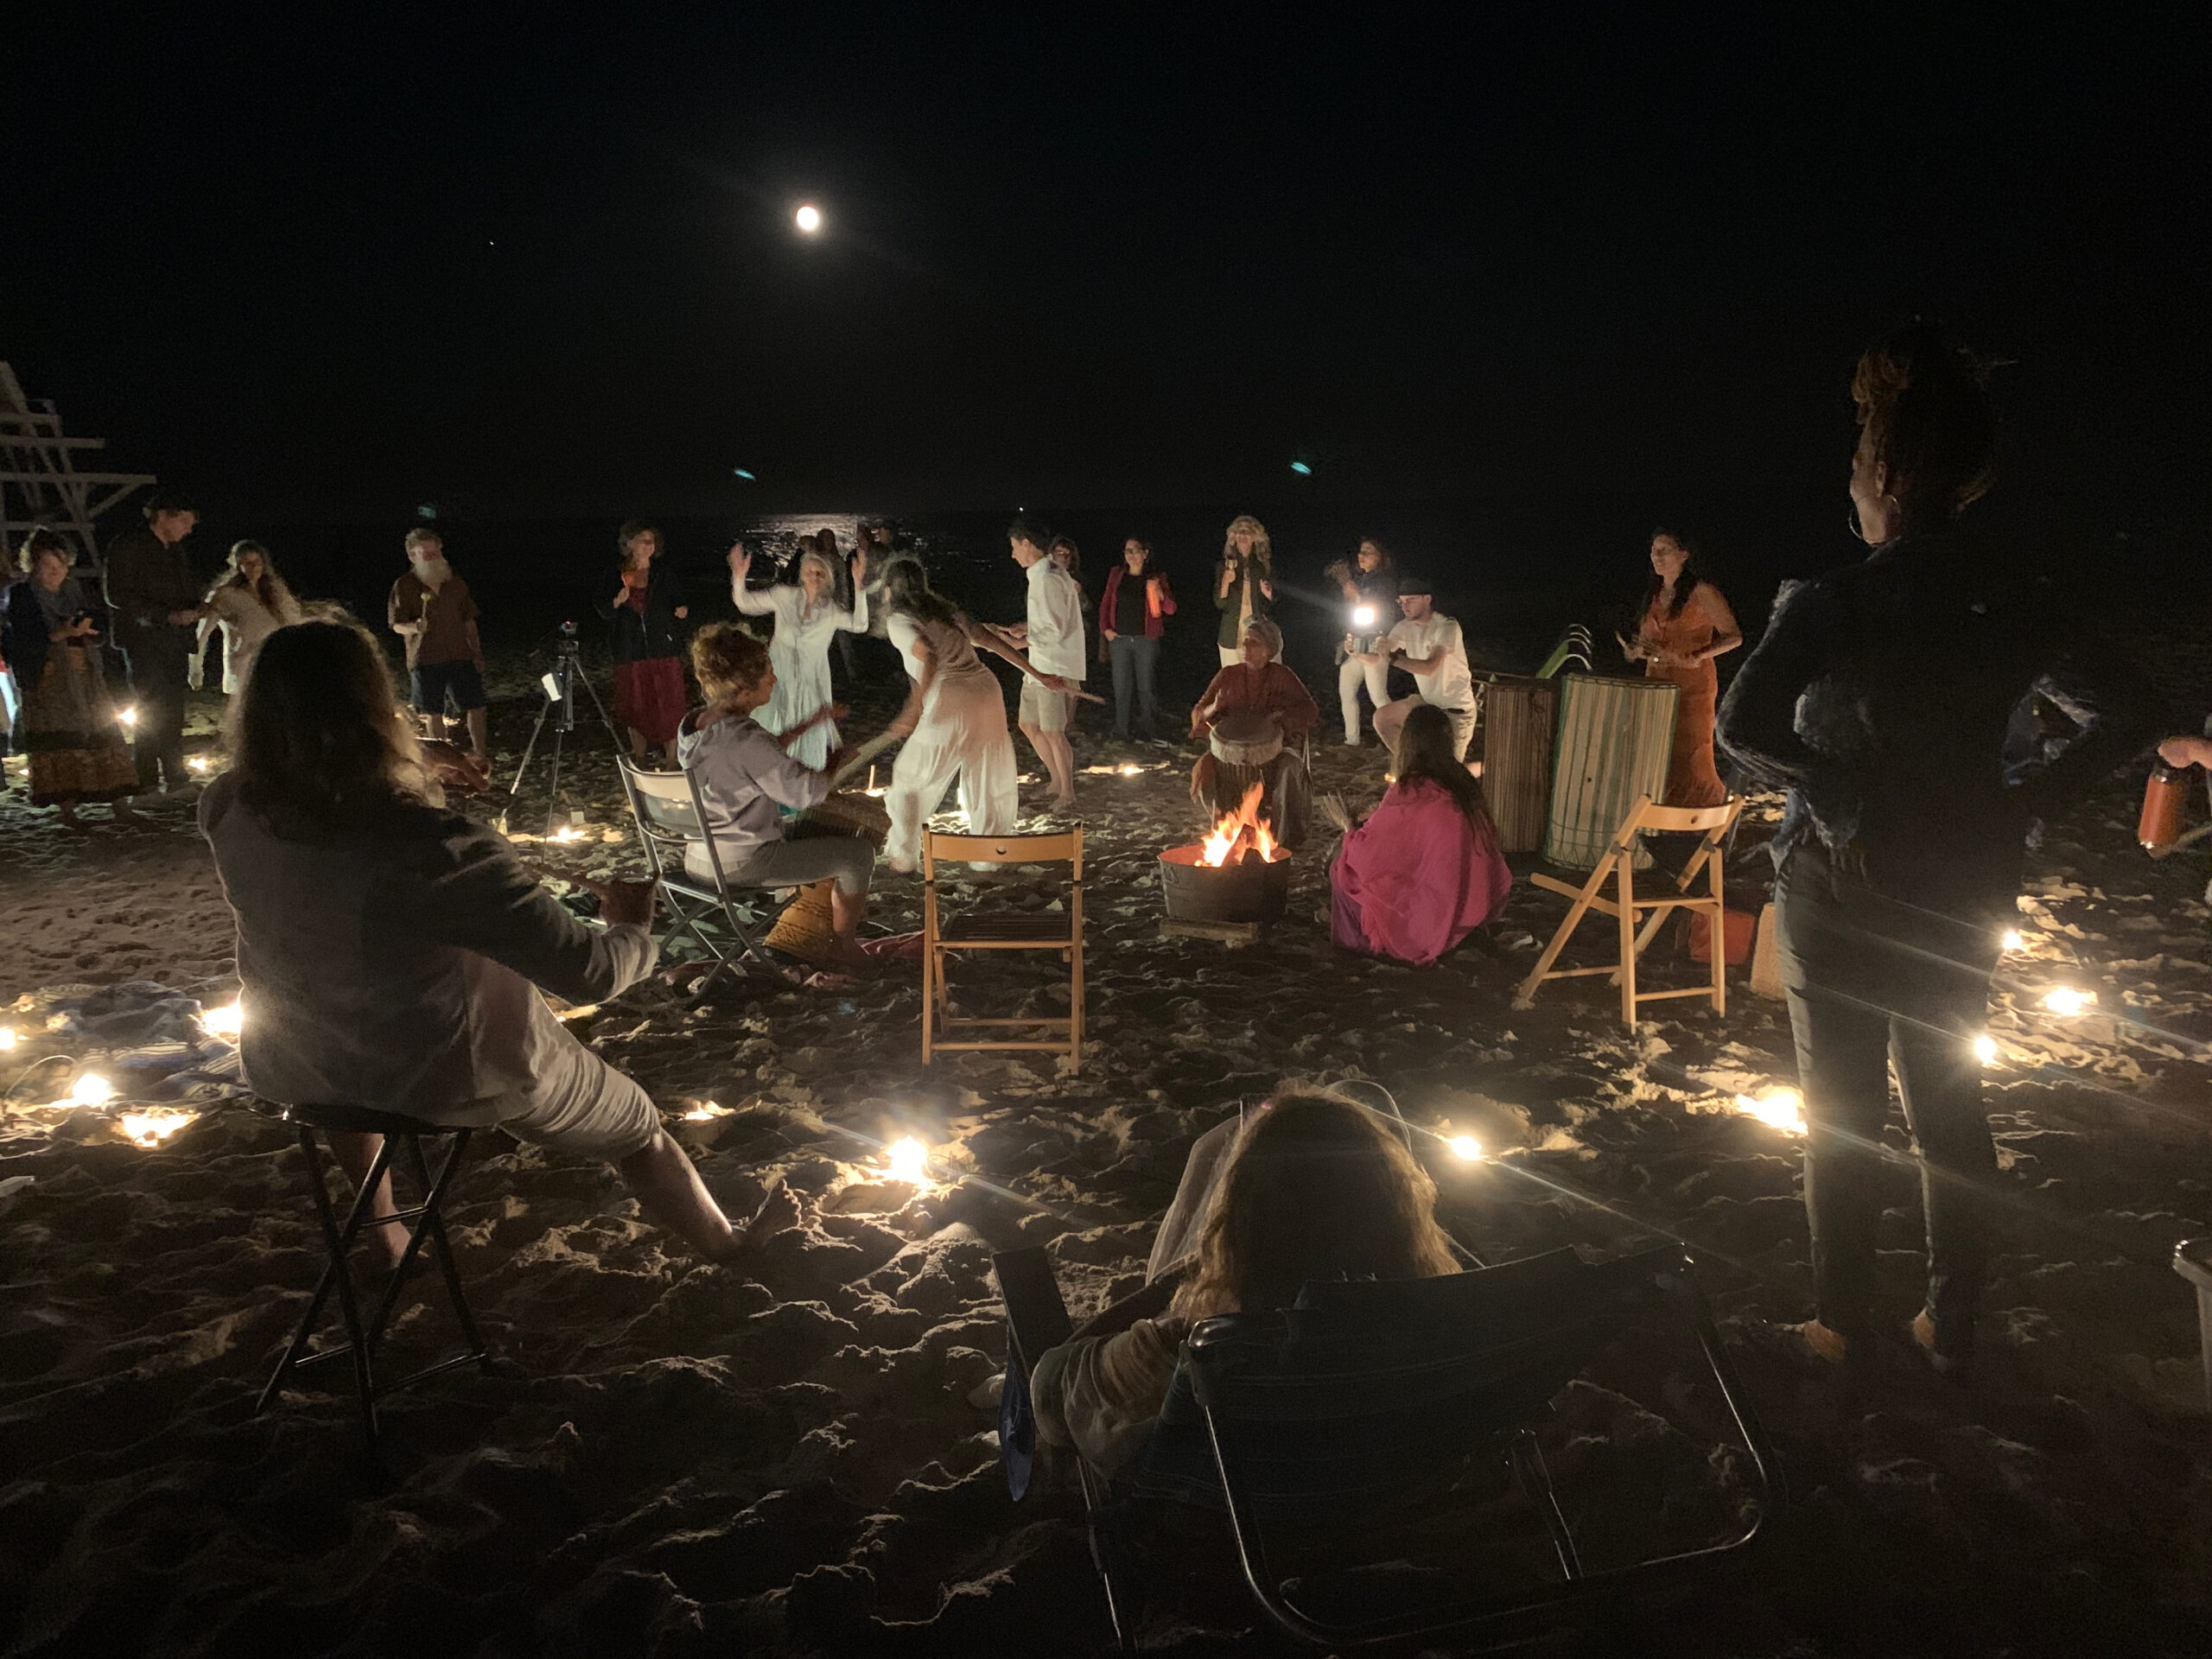 Artist Christina Sun, standing at right with drum, responds to a love letter from West Coast artist Catherine Scott with a piece offered on East Hampton's Main Beach under the full moon of September 10. ANNETTE HINKLE